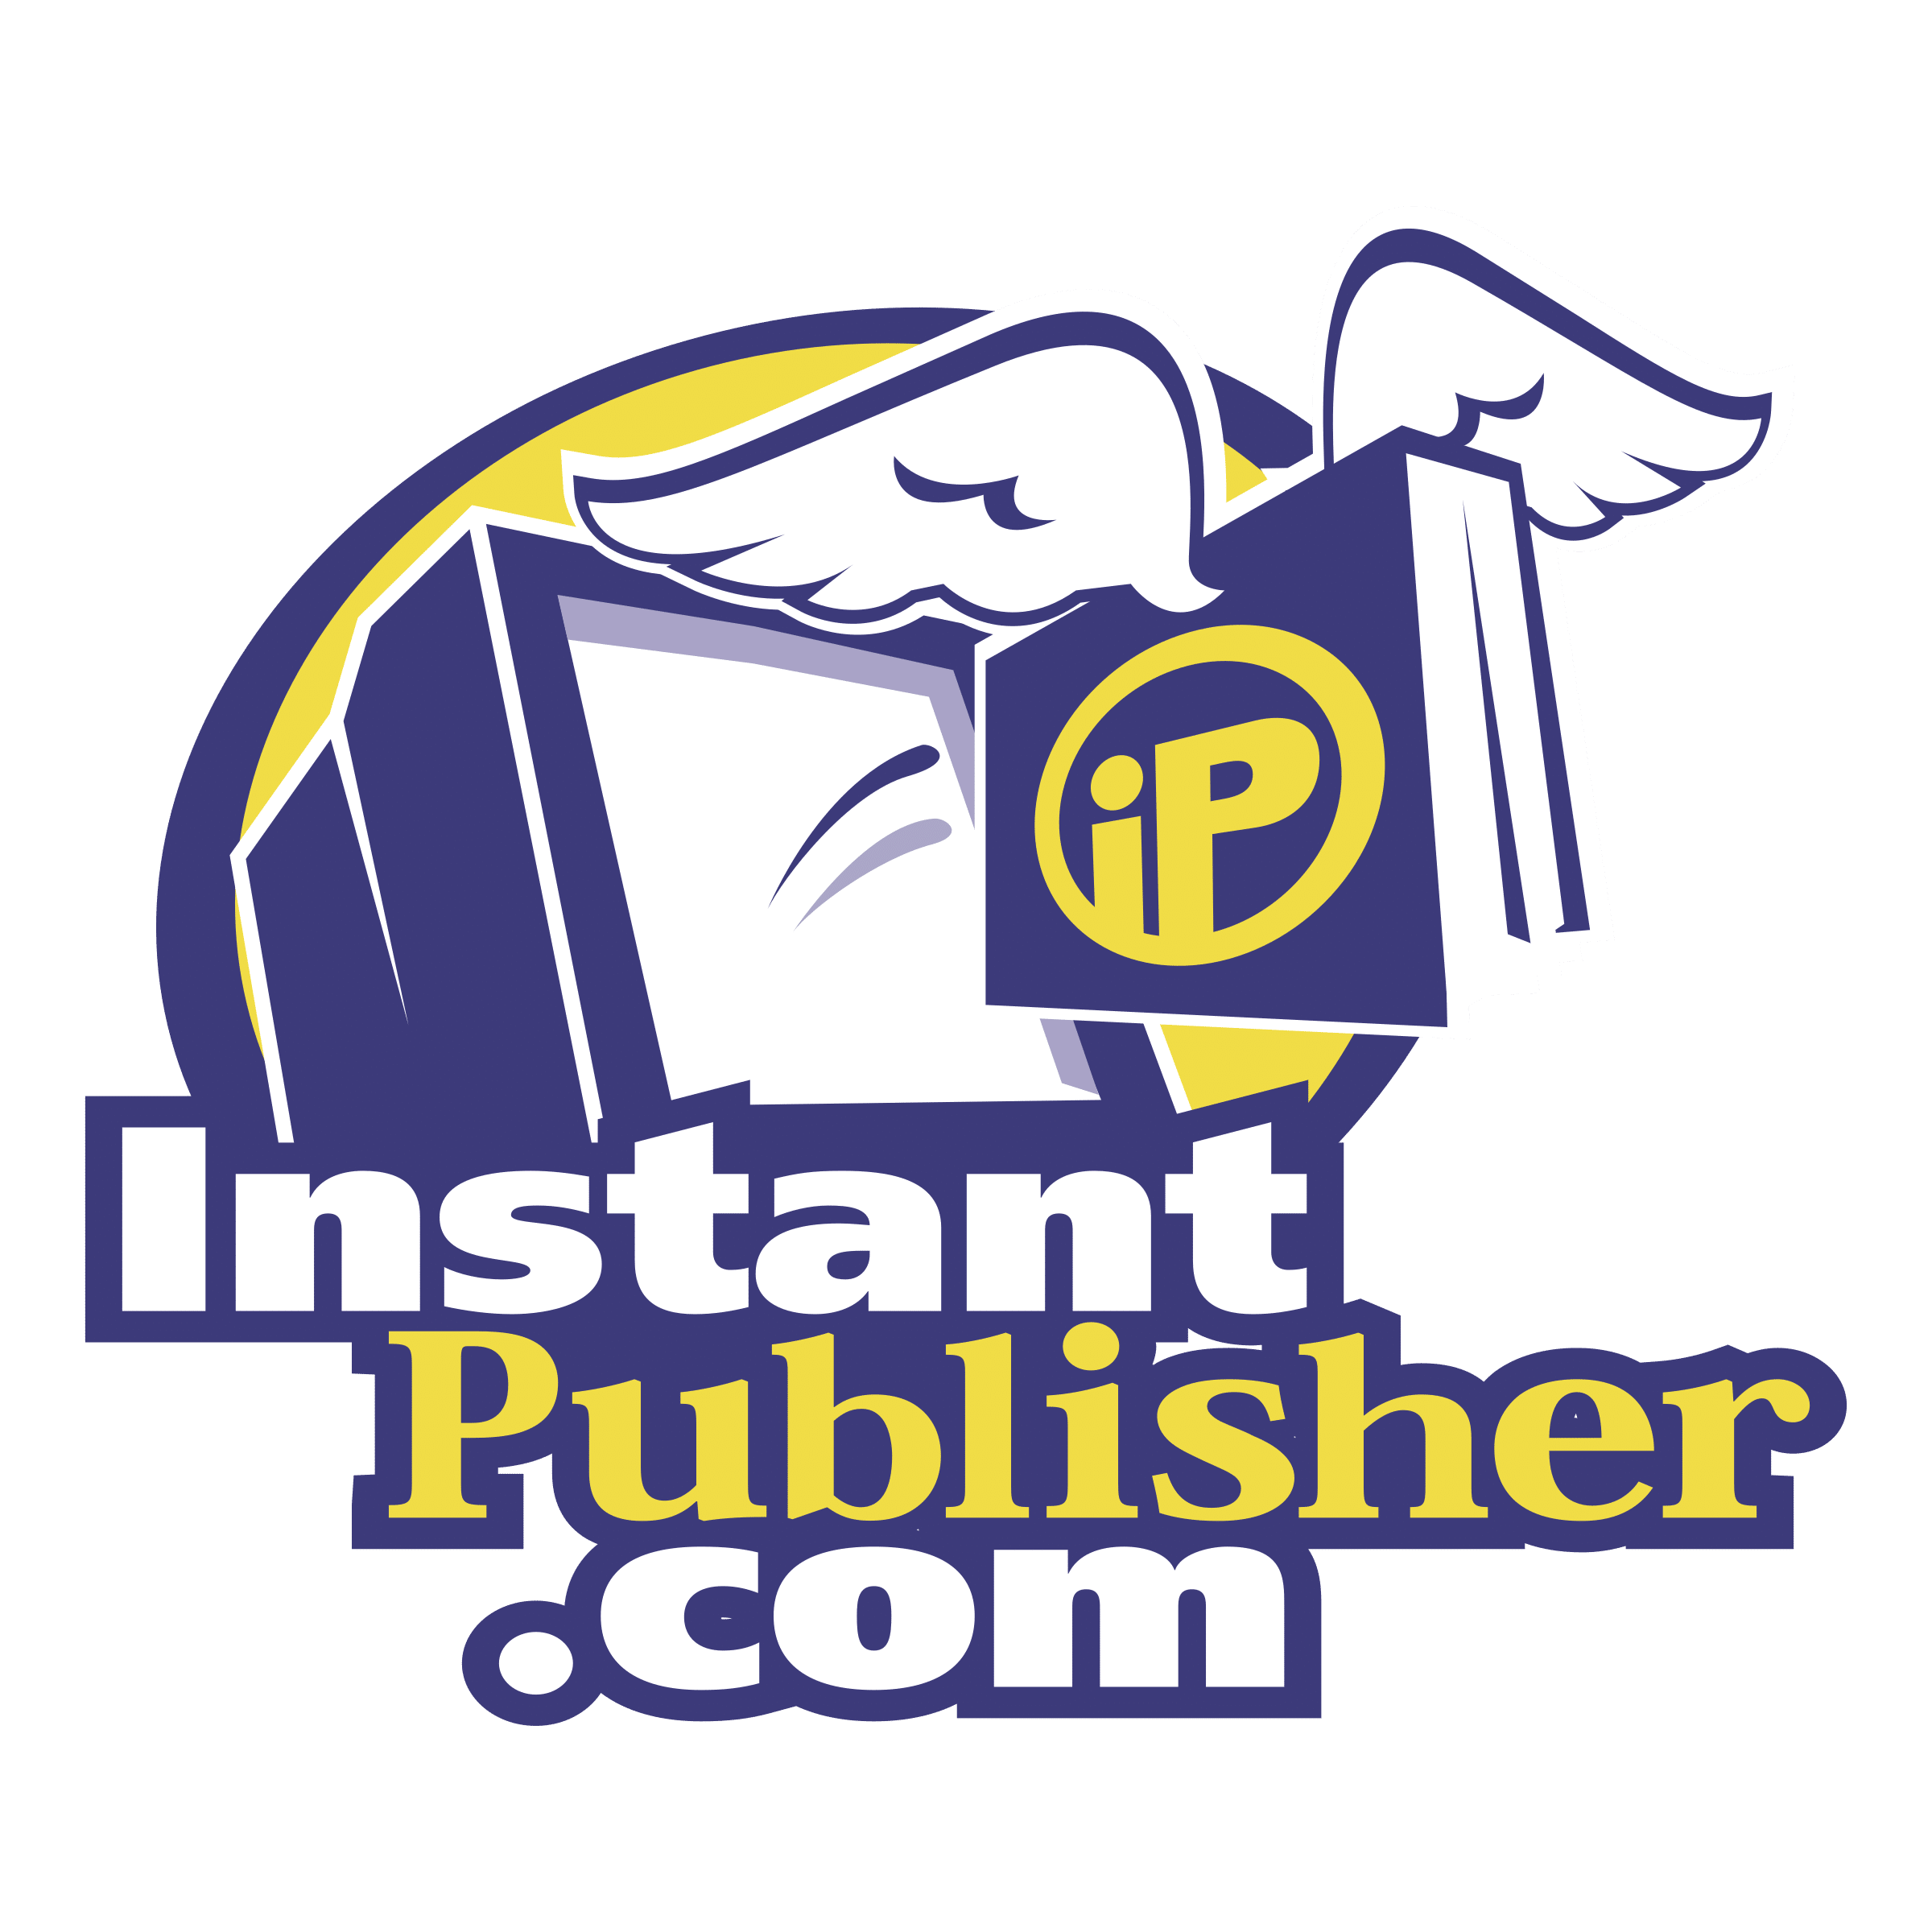 The Instant Publisher